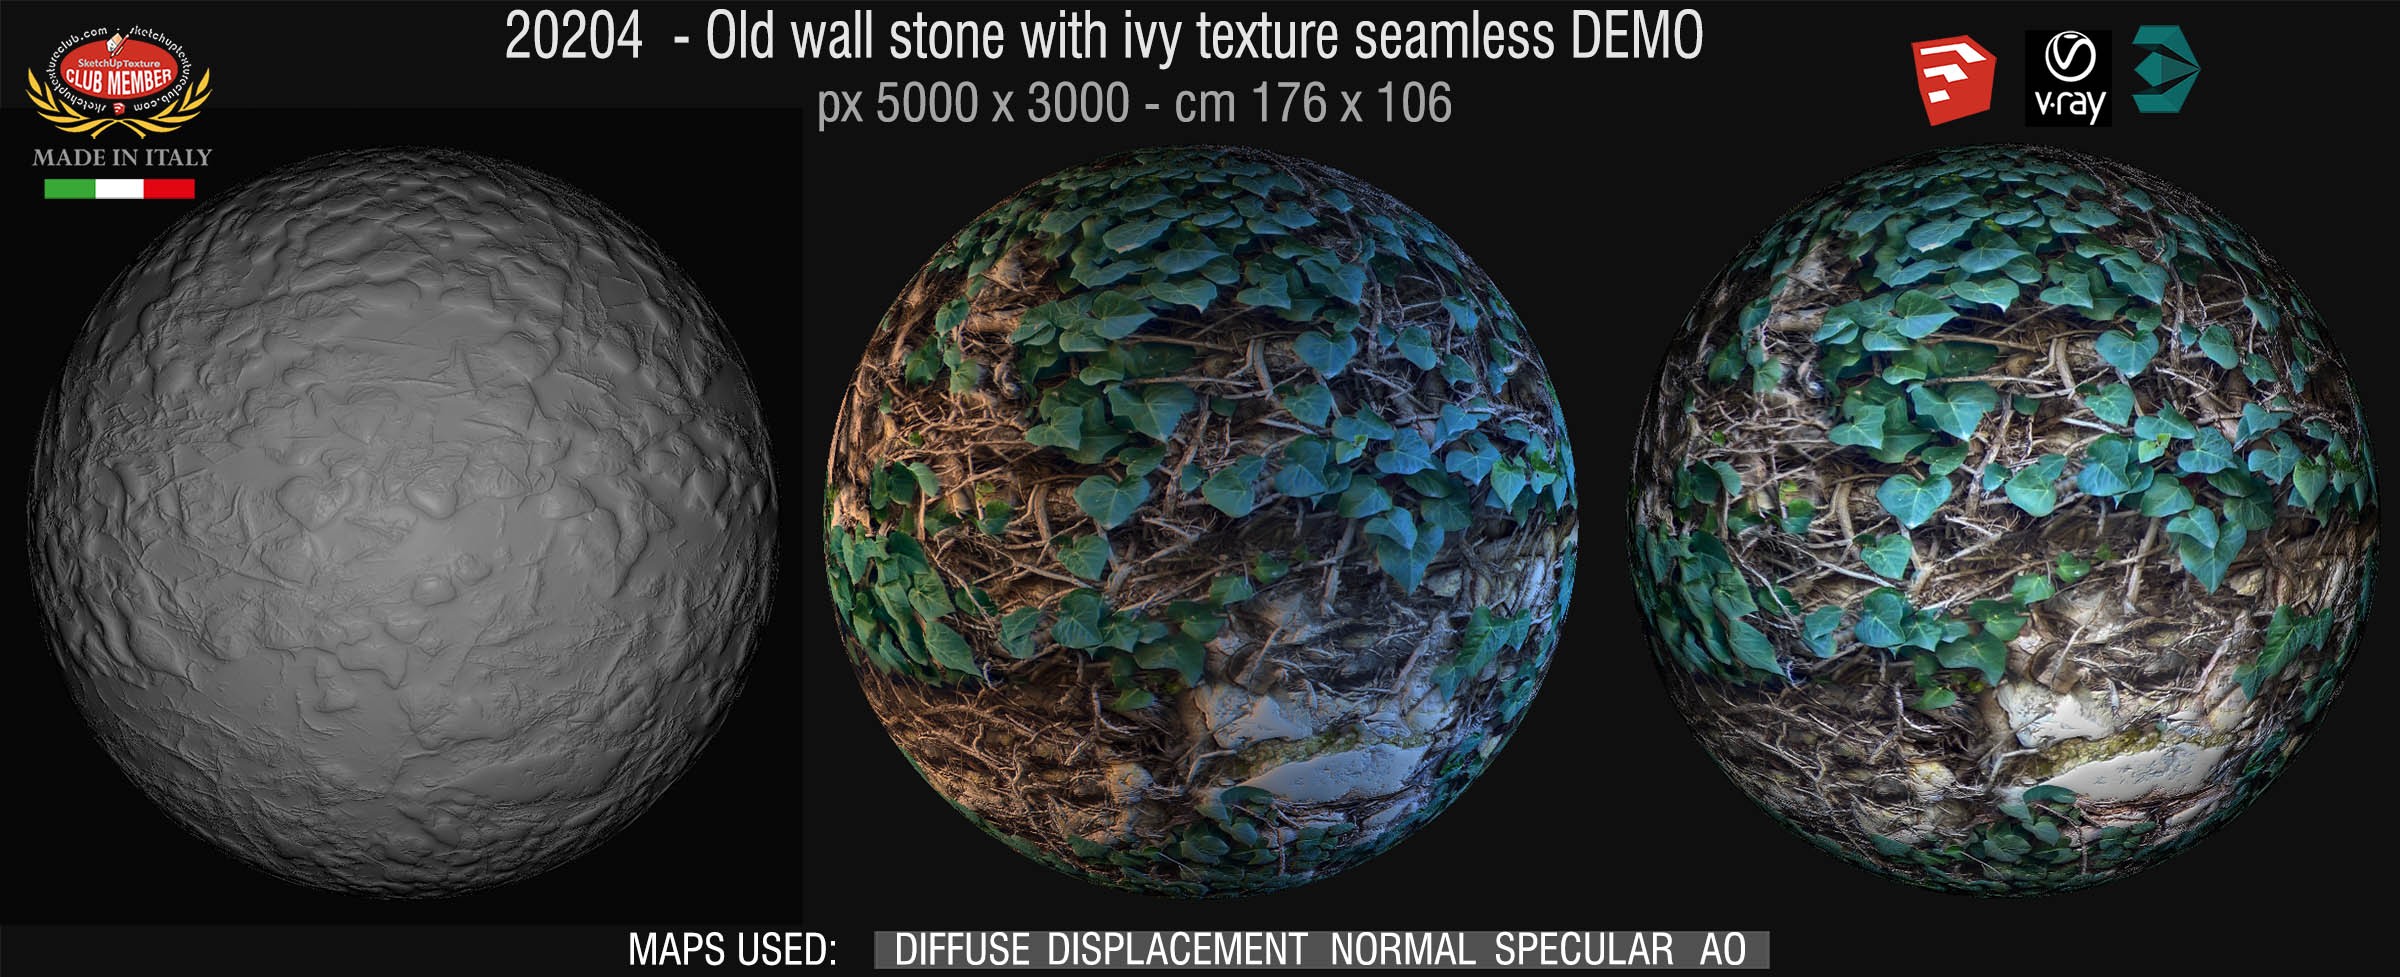 20204 HR Old wall stone with ivy texture seamless + maps DEMO